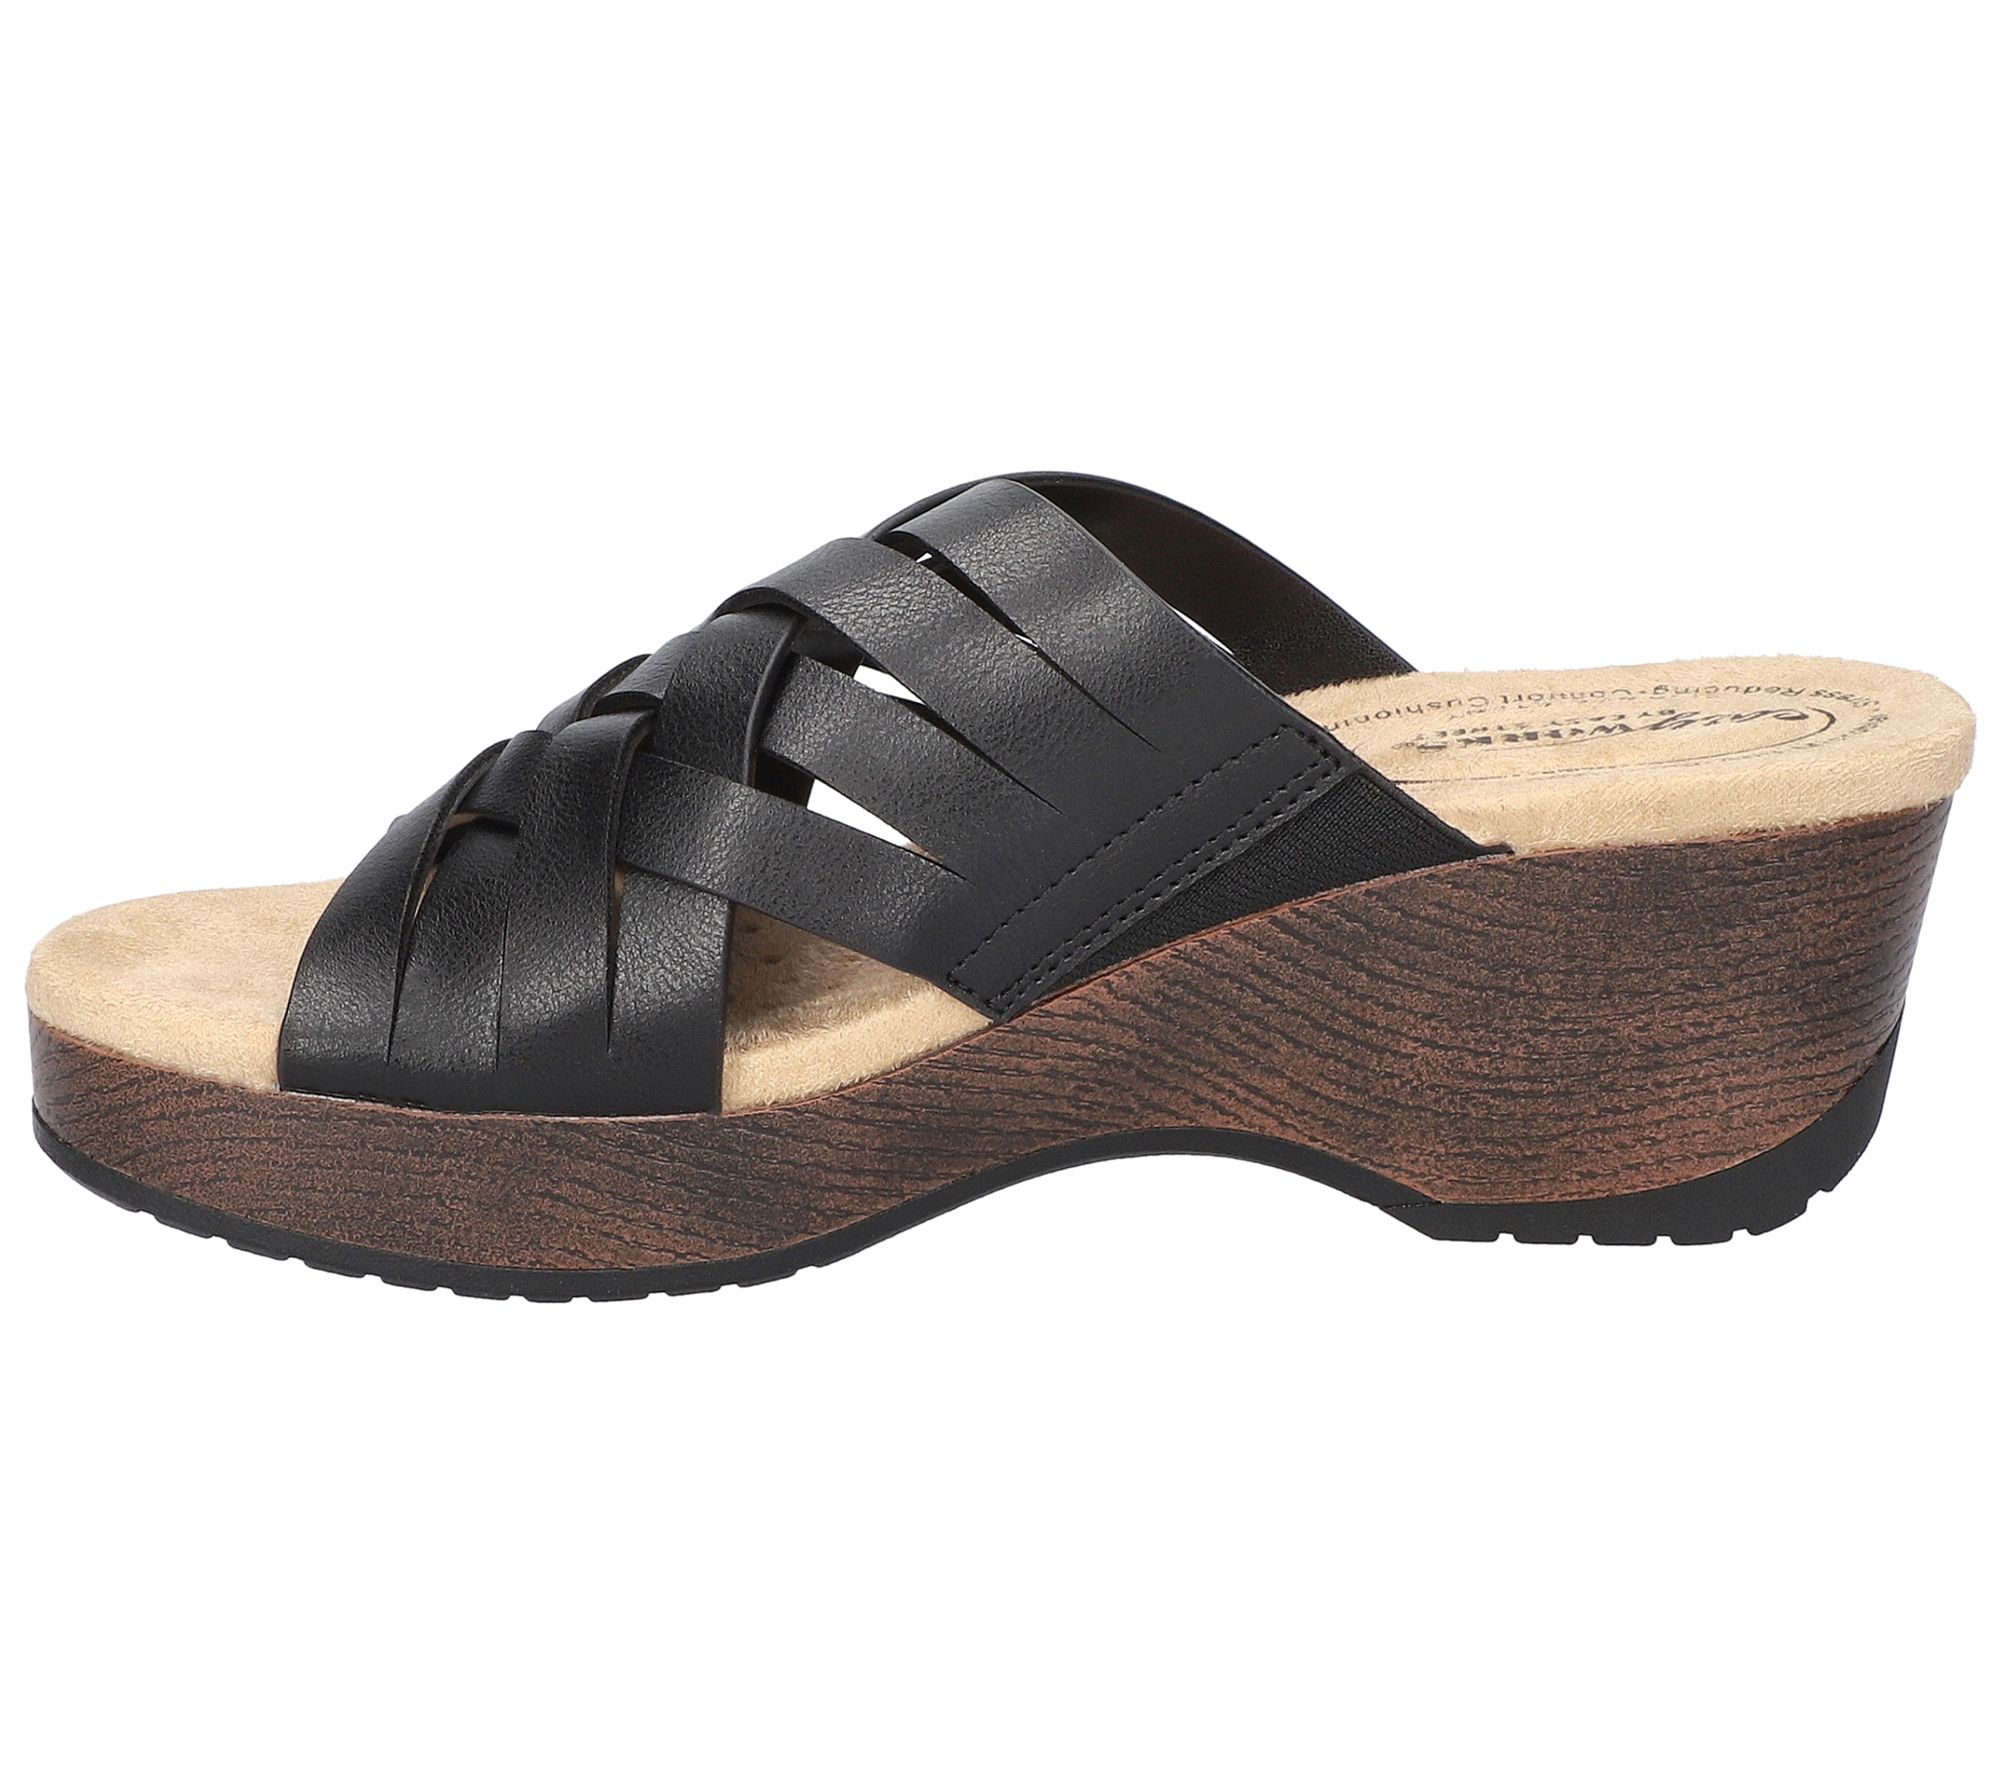 Easy Works by Easy Street Slip-Resistant Wedgeandals-Rosanna - QVC.com